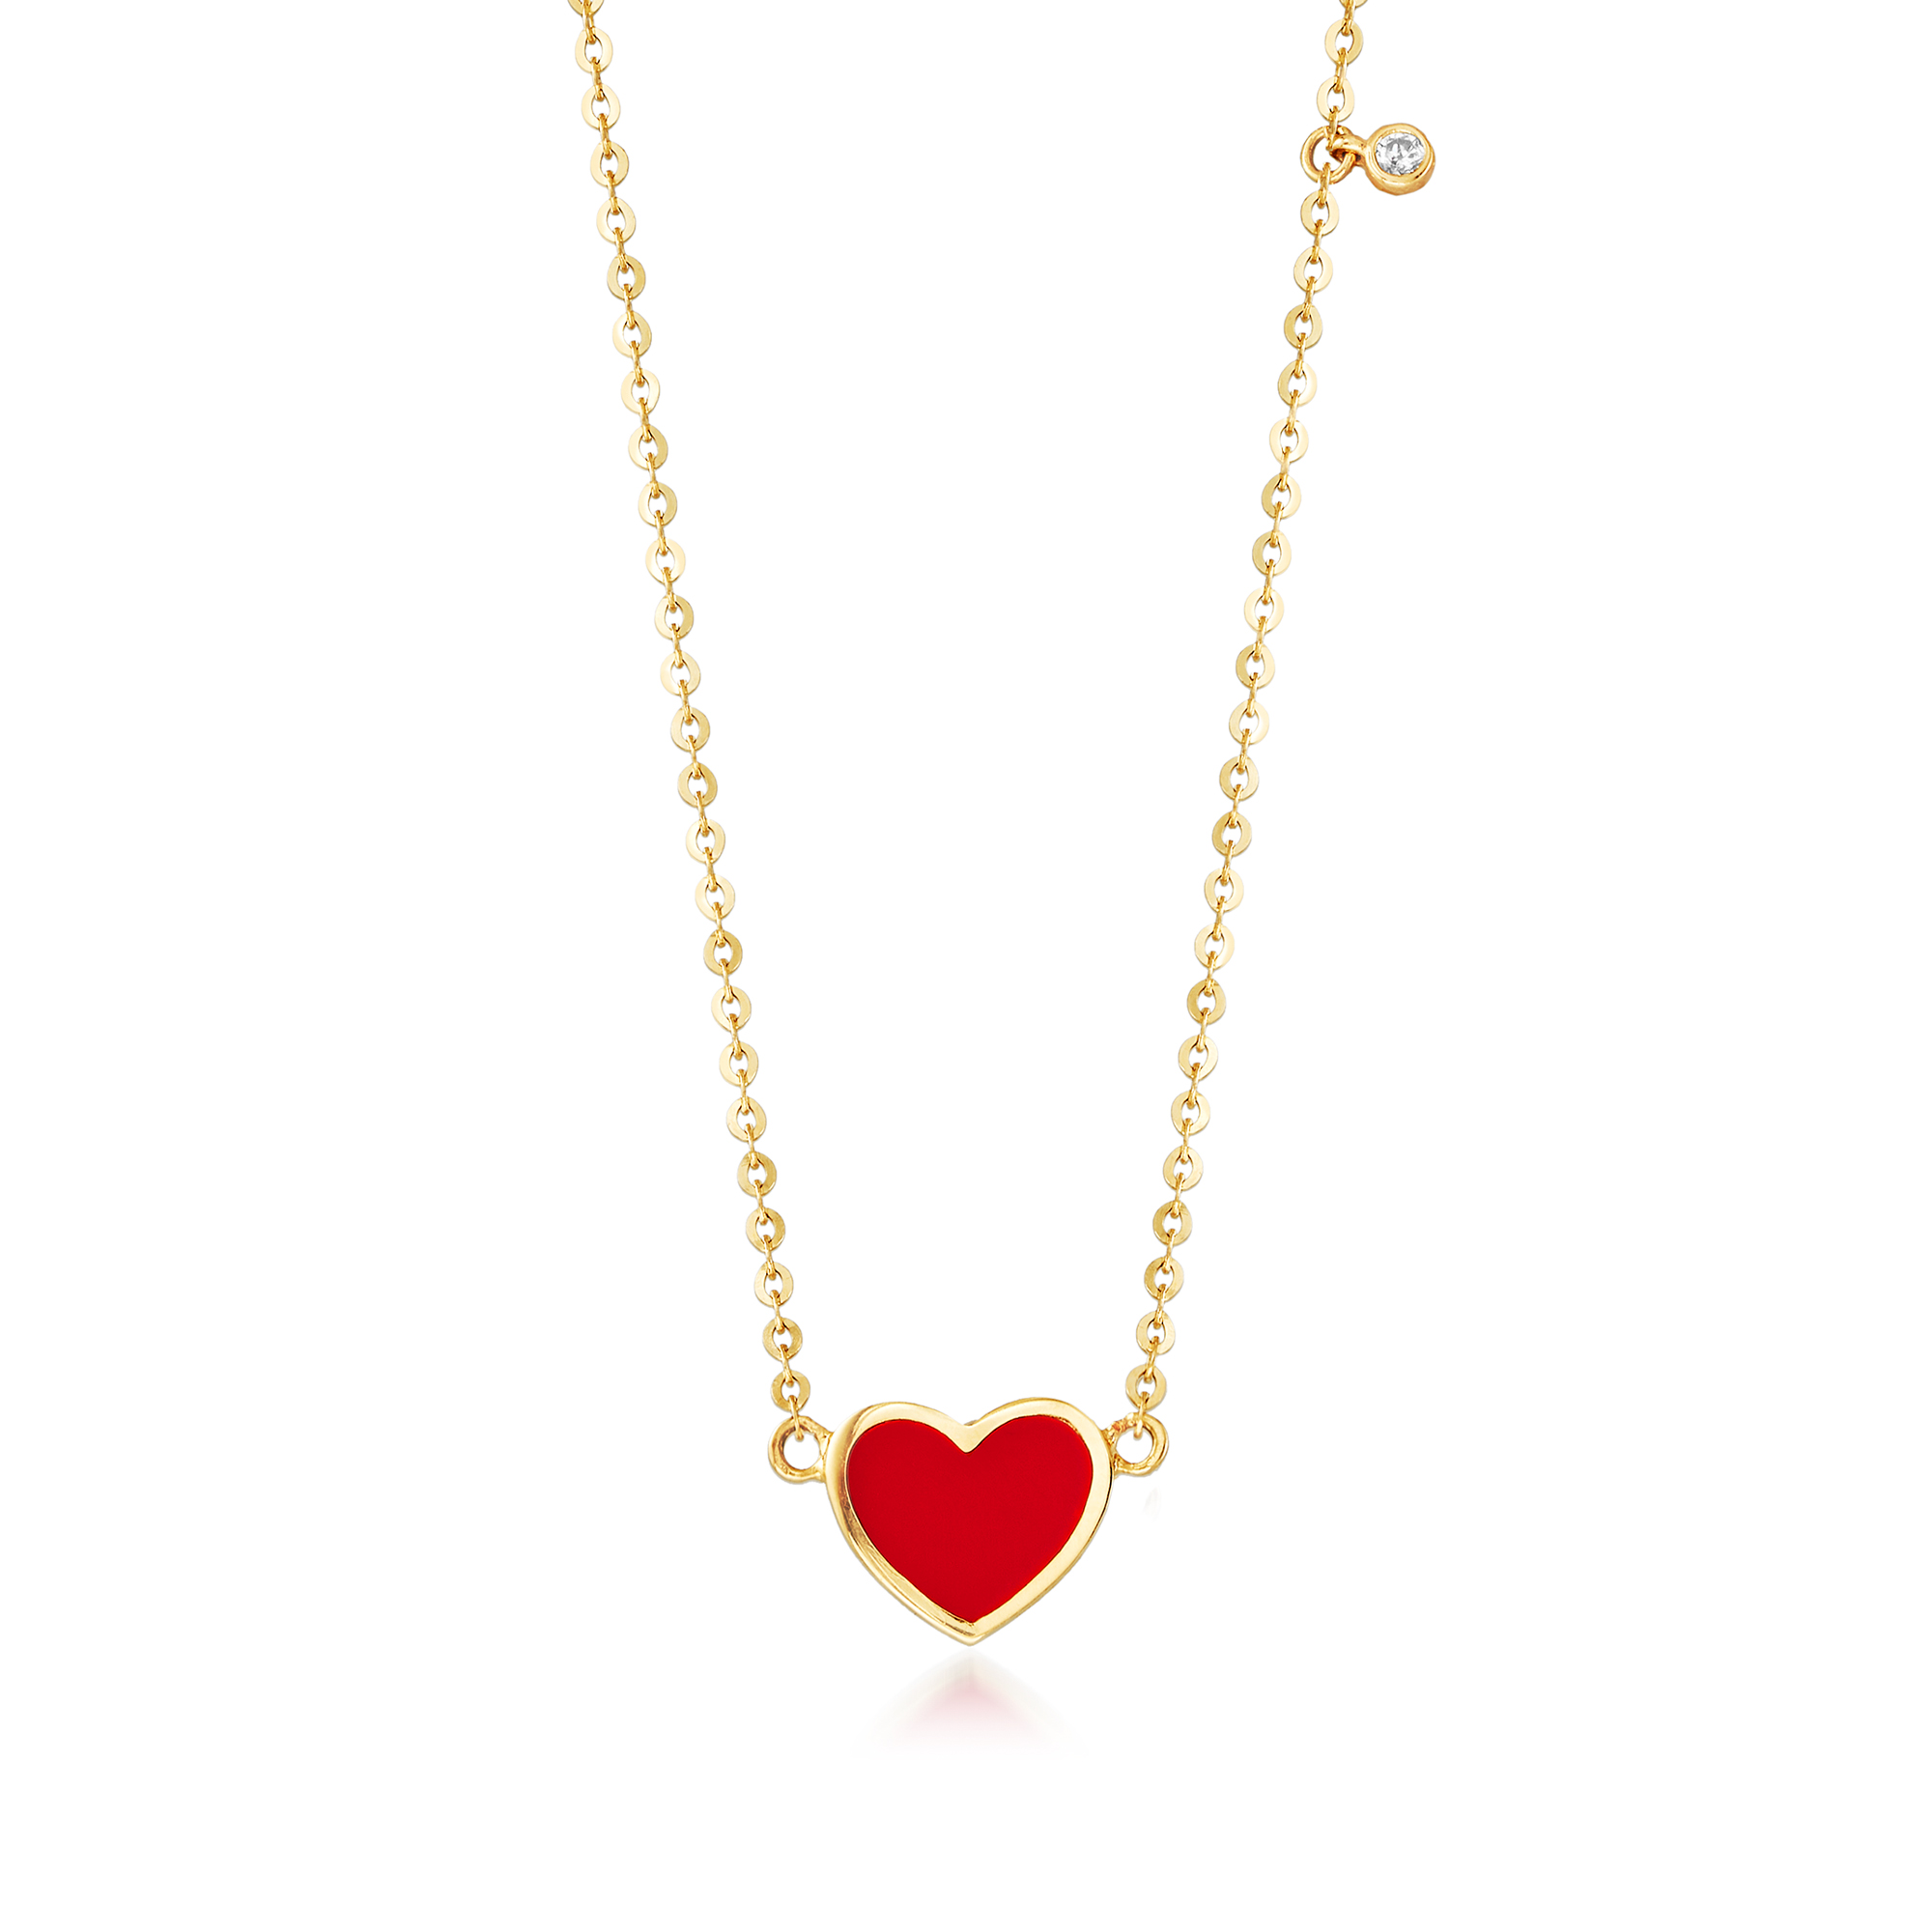 Enamel Heart Necklace 14K Rose Gold / 6mm by Baby Gold - Shop Custom Gold Jewelry